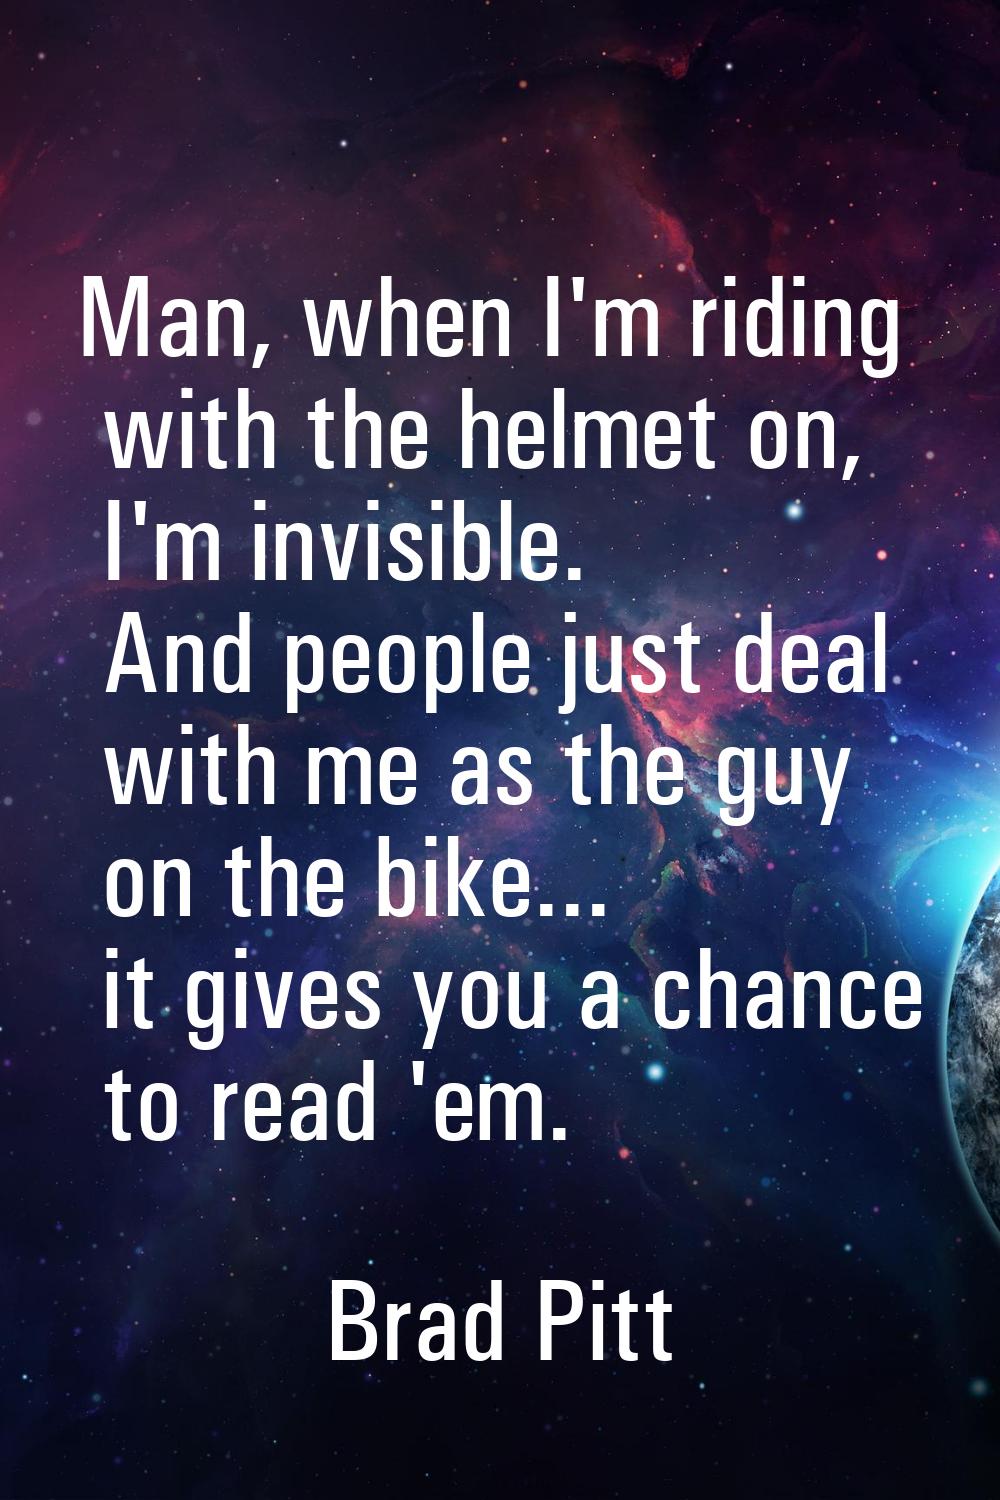 Man, when I'm riding with the helmet on, I'm invisible. And people just deal with me as the guy on 